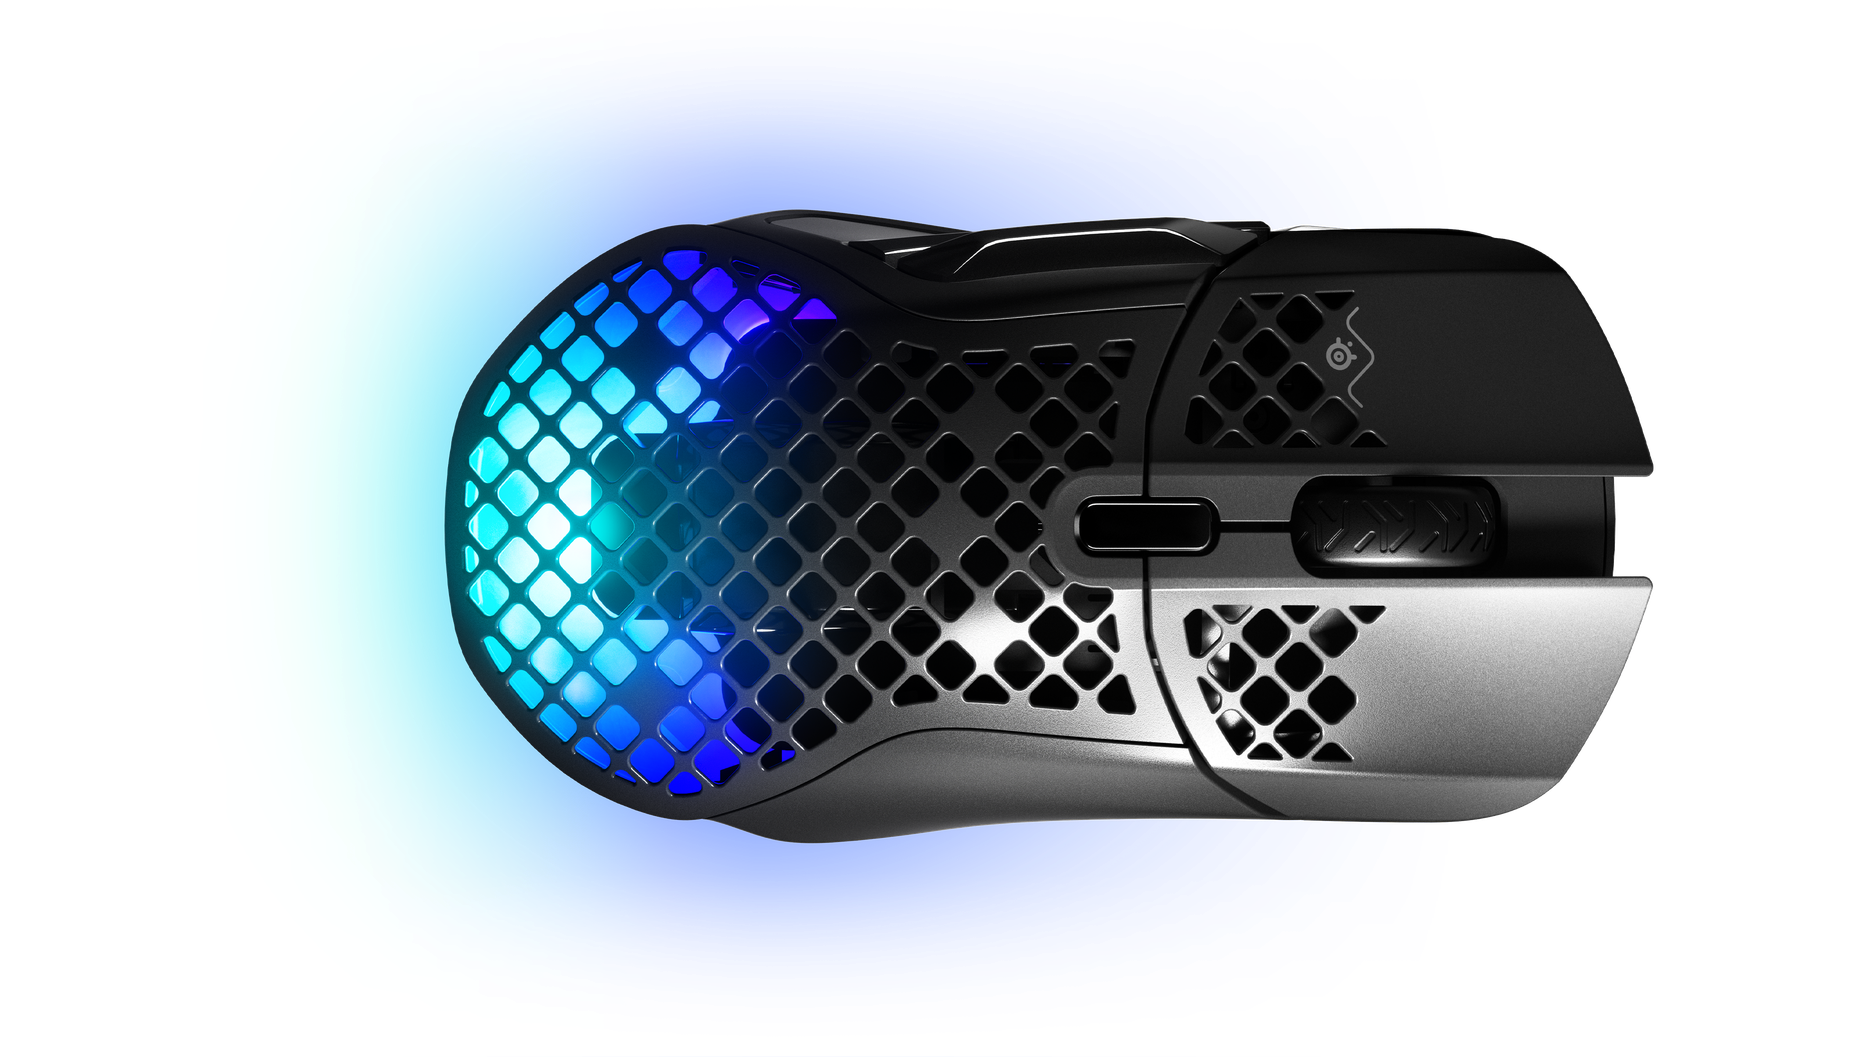 
 A top-down view of the Aerox 5 Wireless mouse.
 